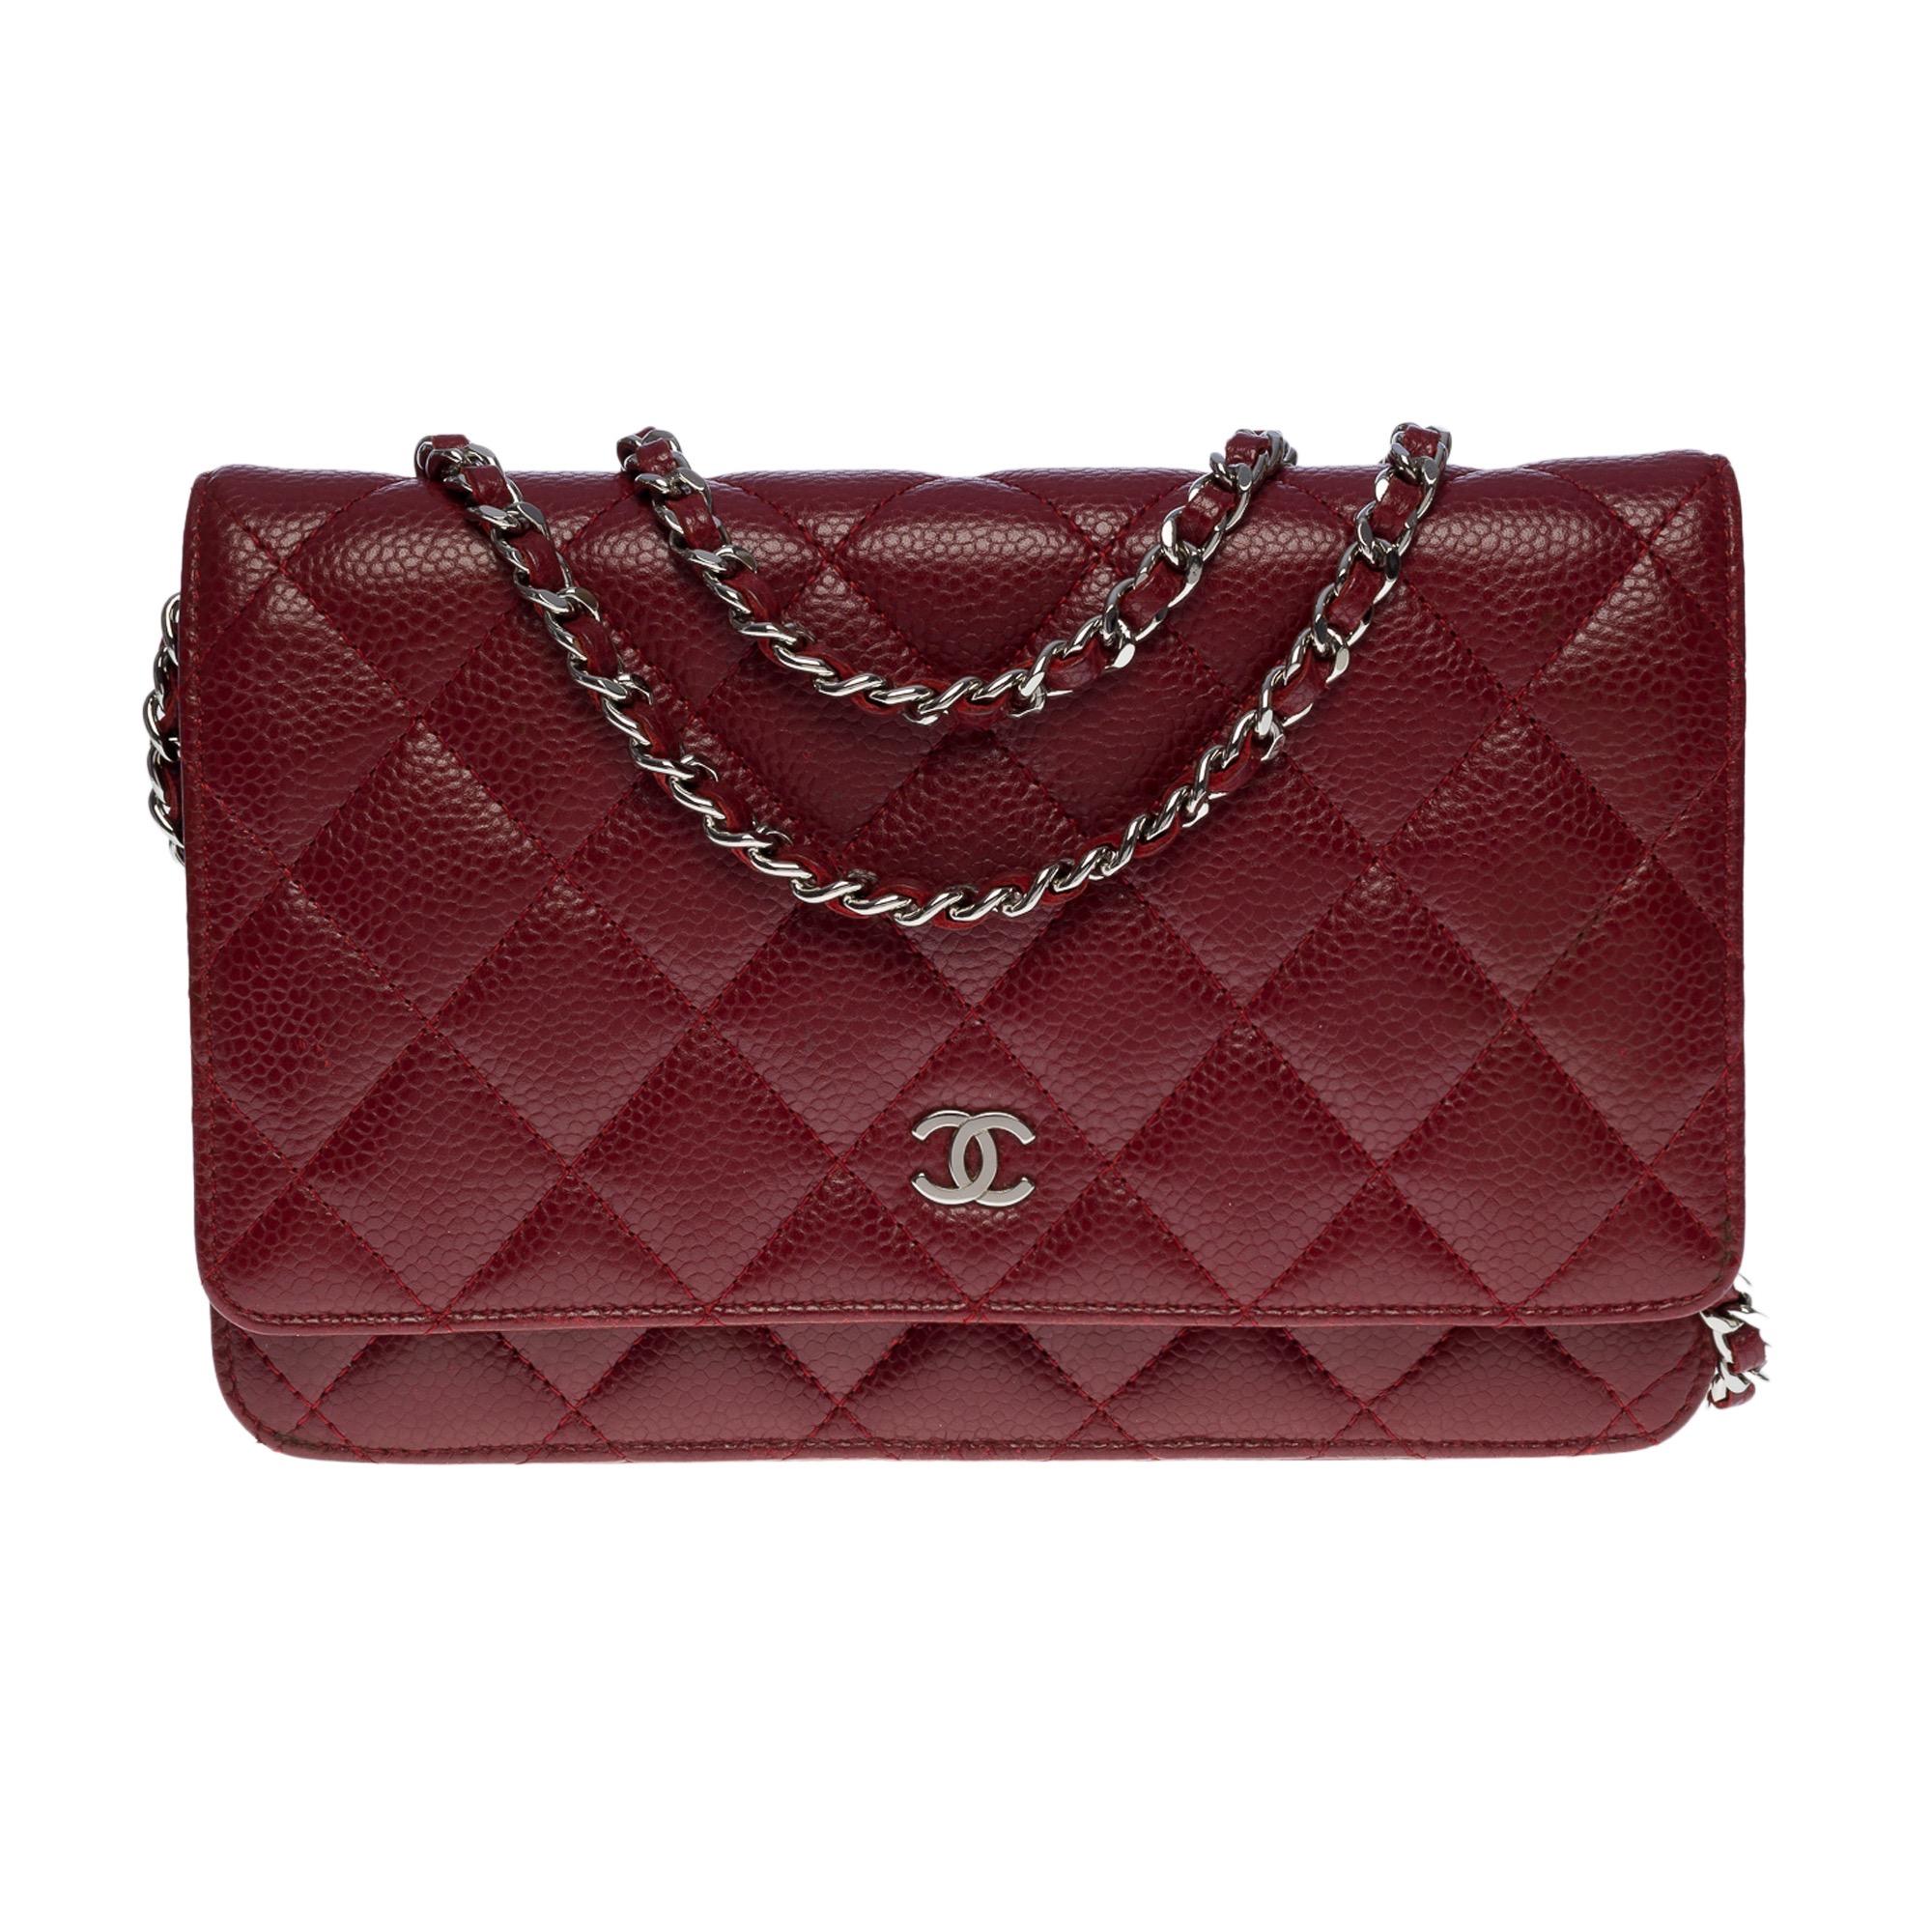 Superb Chanel Wallet On Chain handbag in burgundy quilted caviar leather, silver metal hardware, a silver metal chain handle interlaced with burgundy caviar leather allowing a shoulder or shoulder strap
Backpack pocket
Flap closure, clasp signed CC